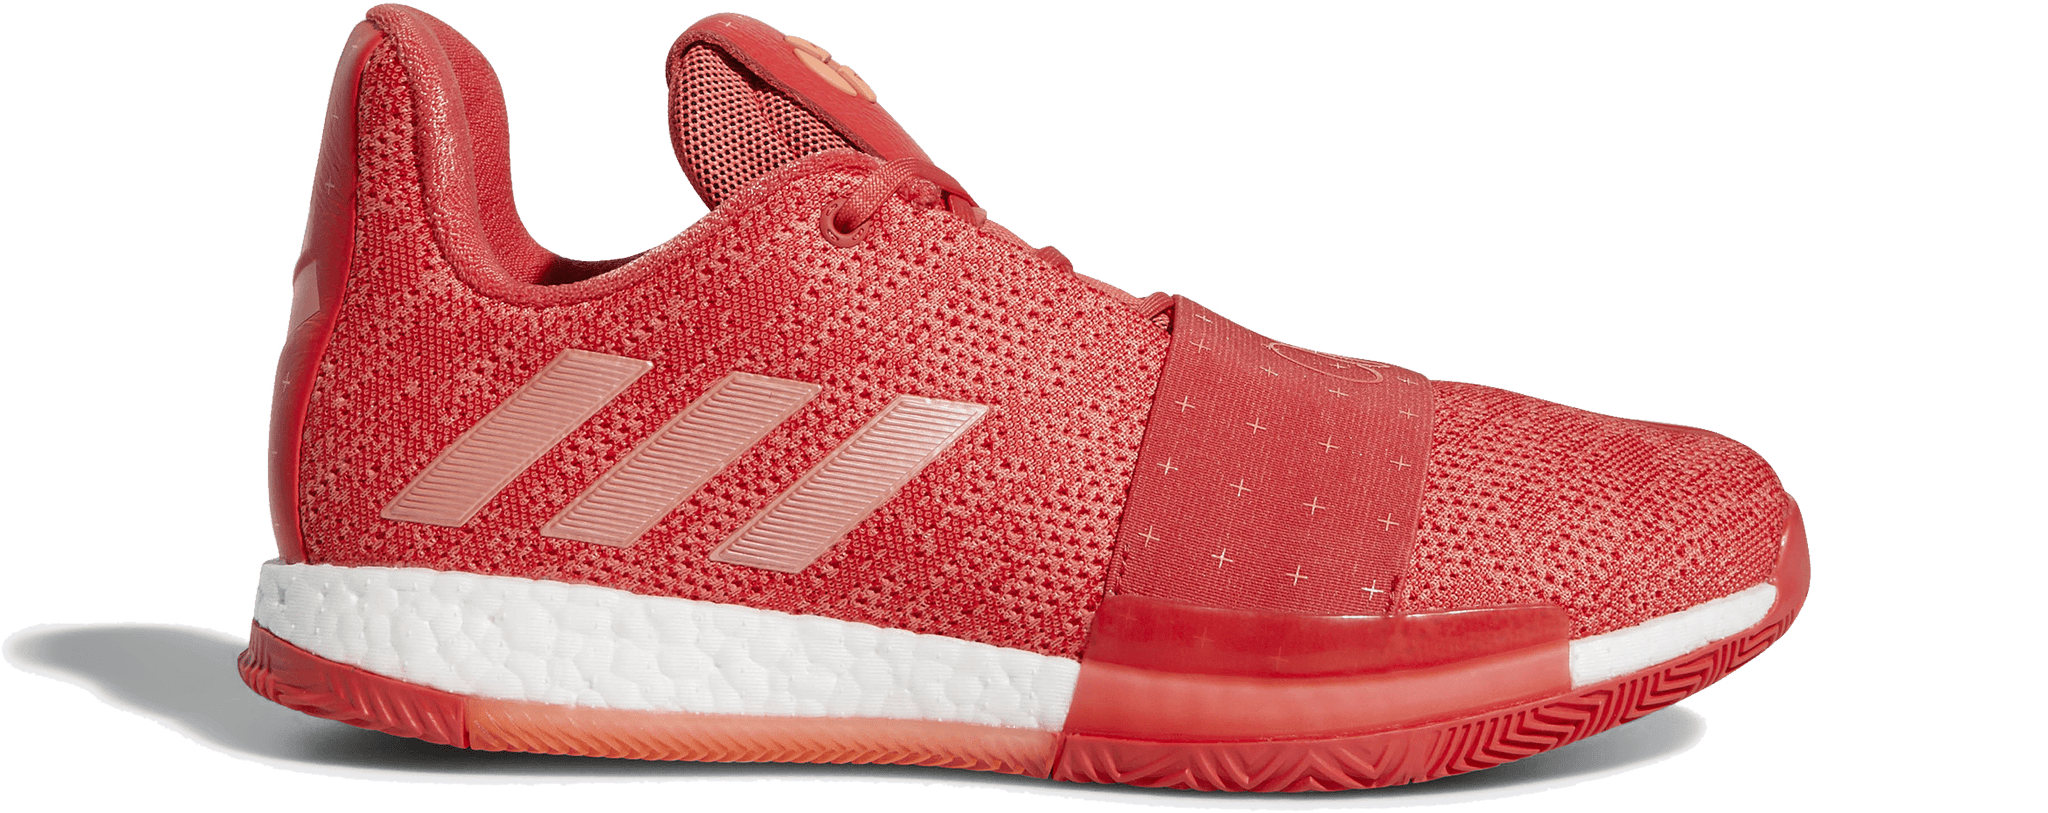 Adidas Harden Vol. 3 Performance Review